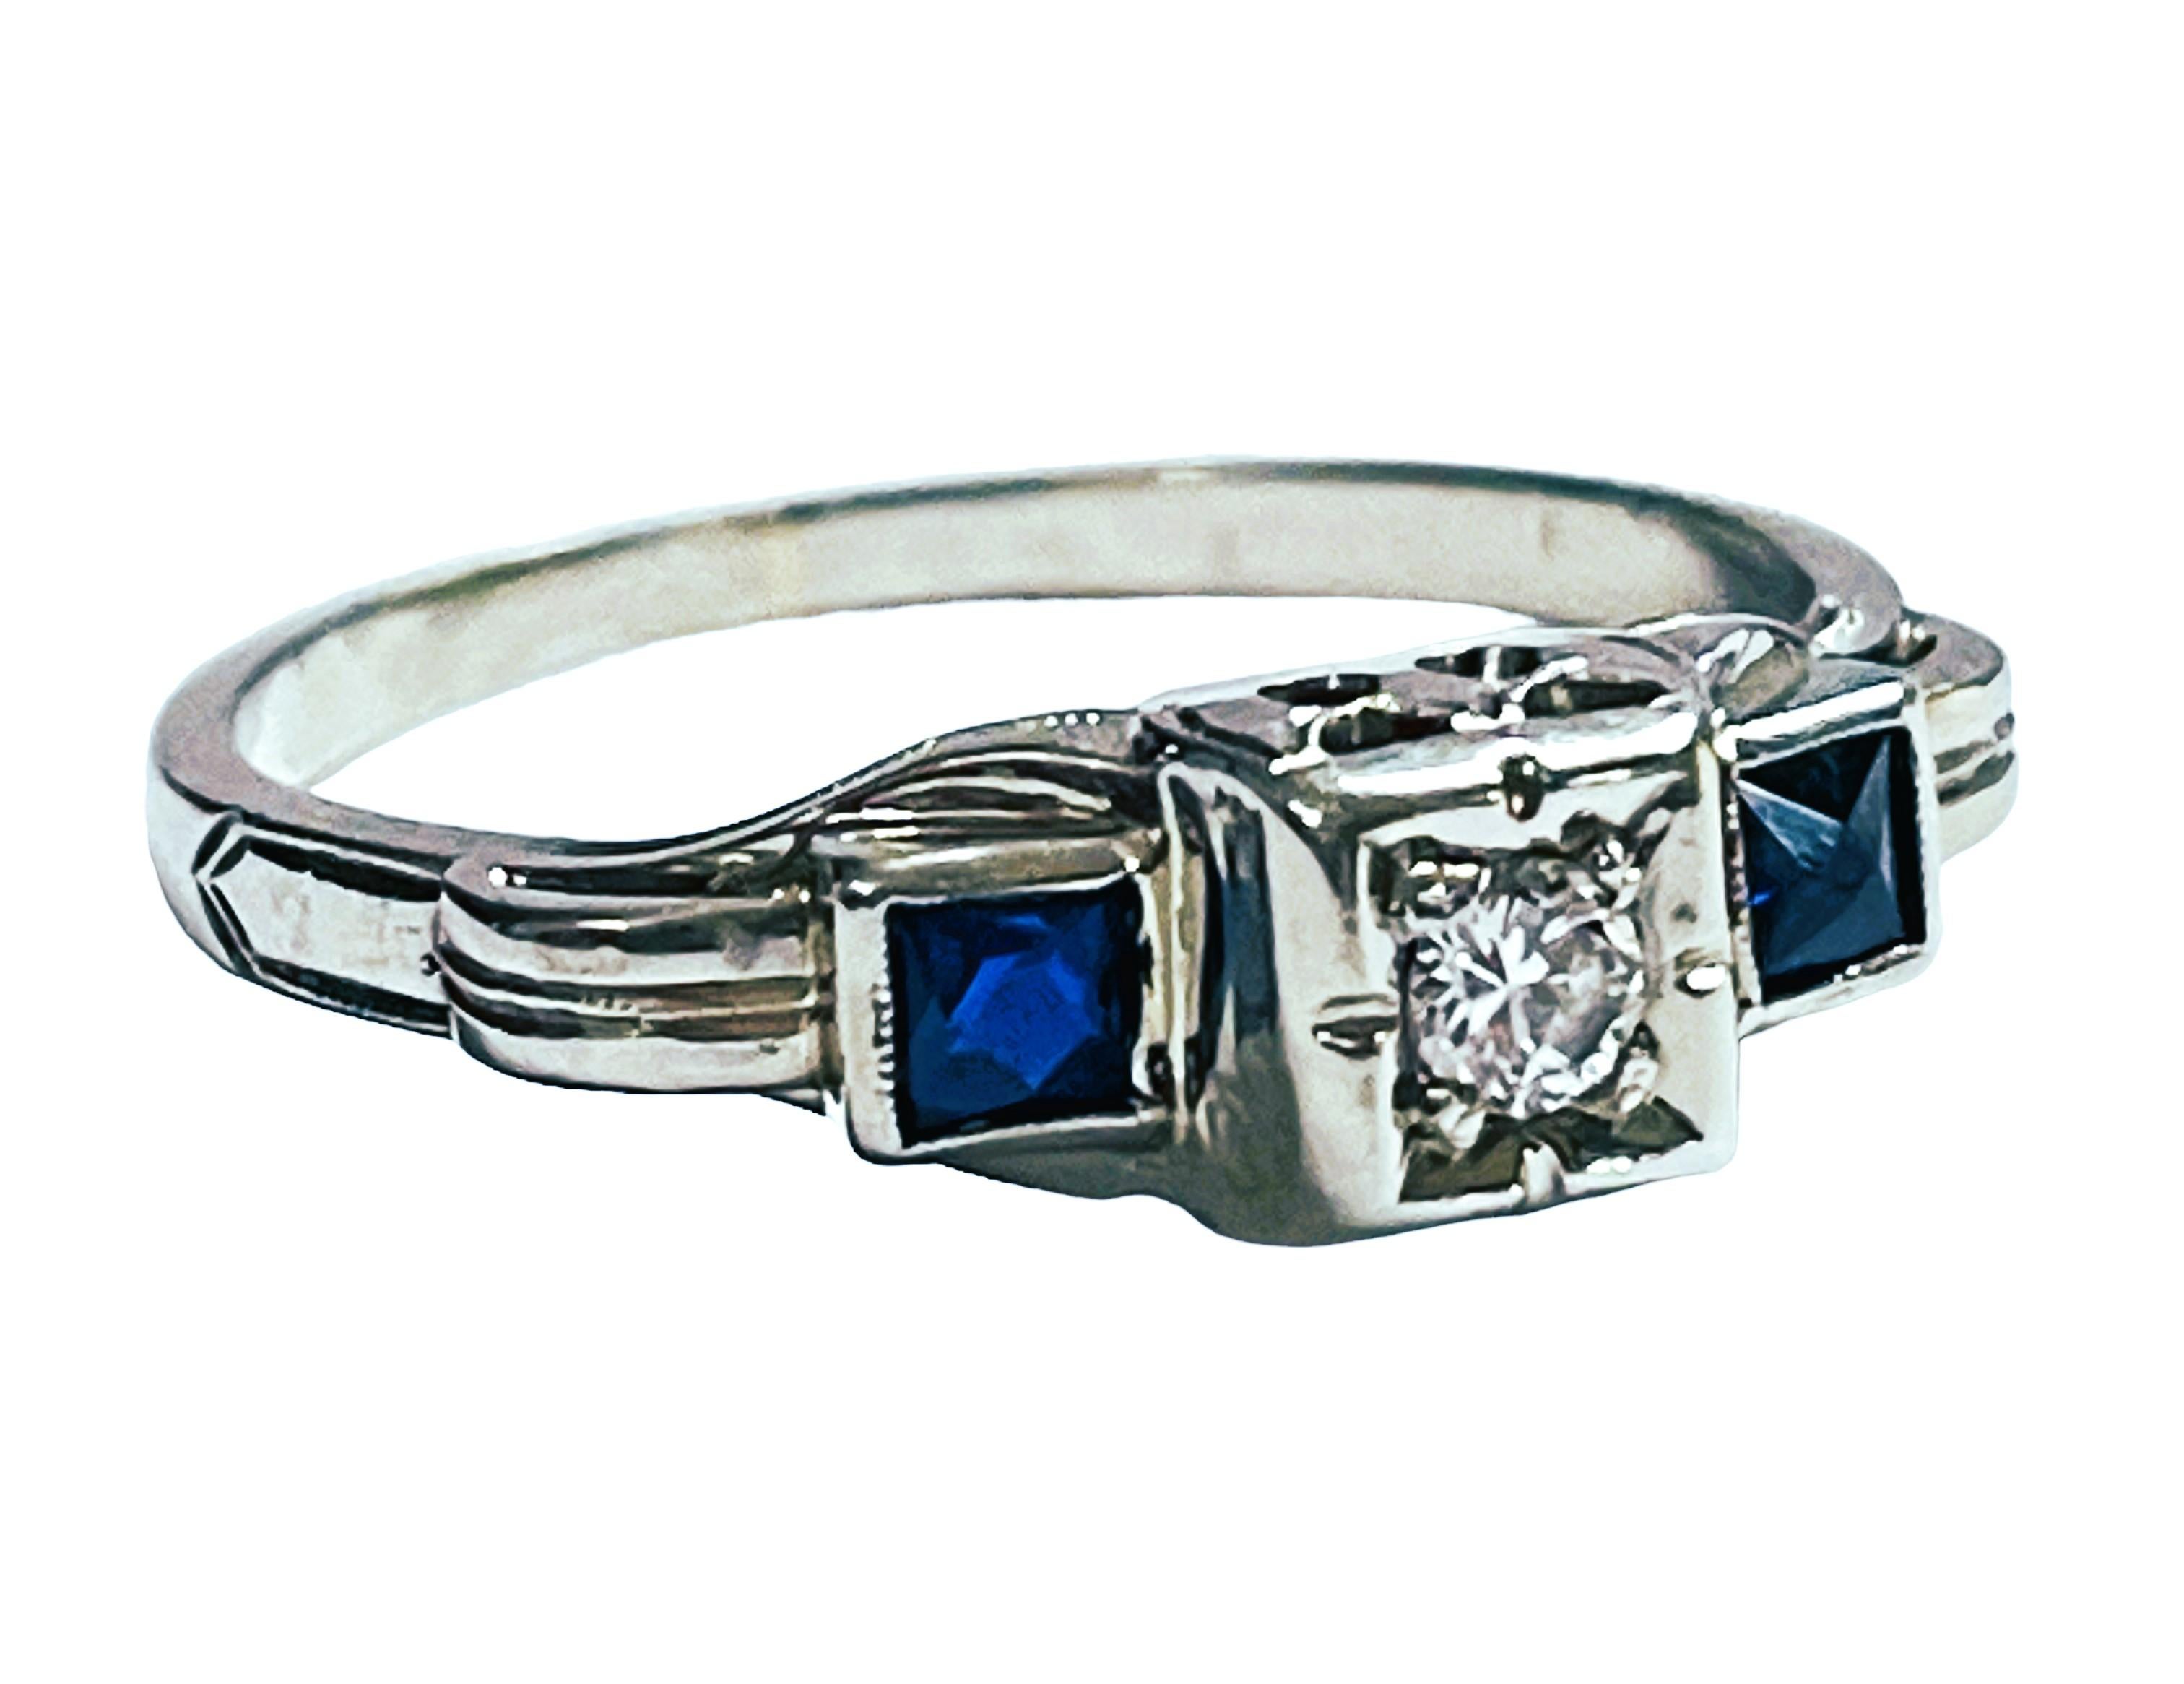 Women's Vintage 18k White Gold Diamond and Sapphire Ring with Appraisal